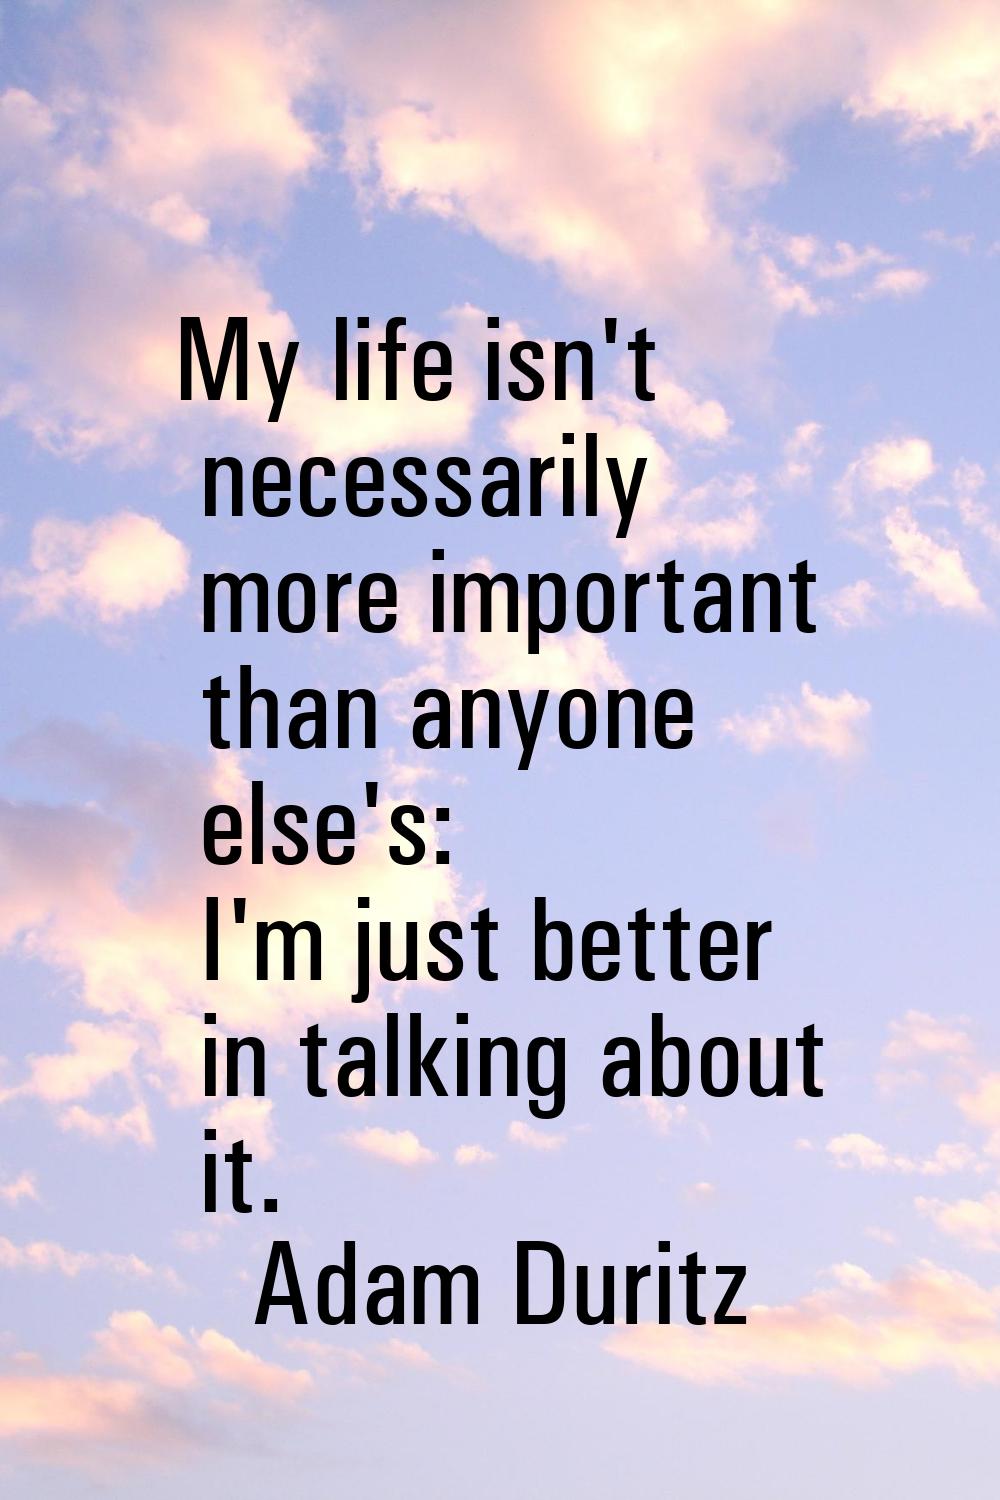 My life isn't necessarily more important than anyone else's: I'm just better in talking about it.